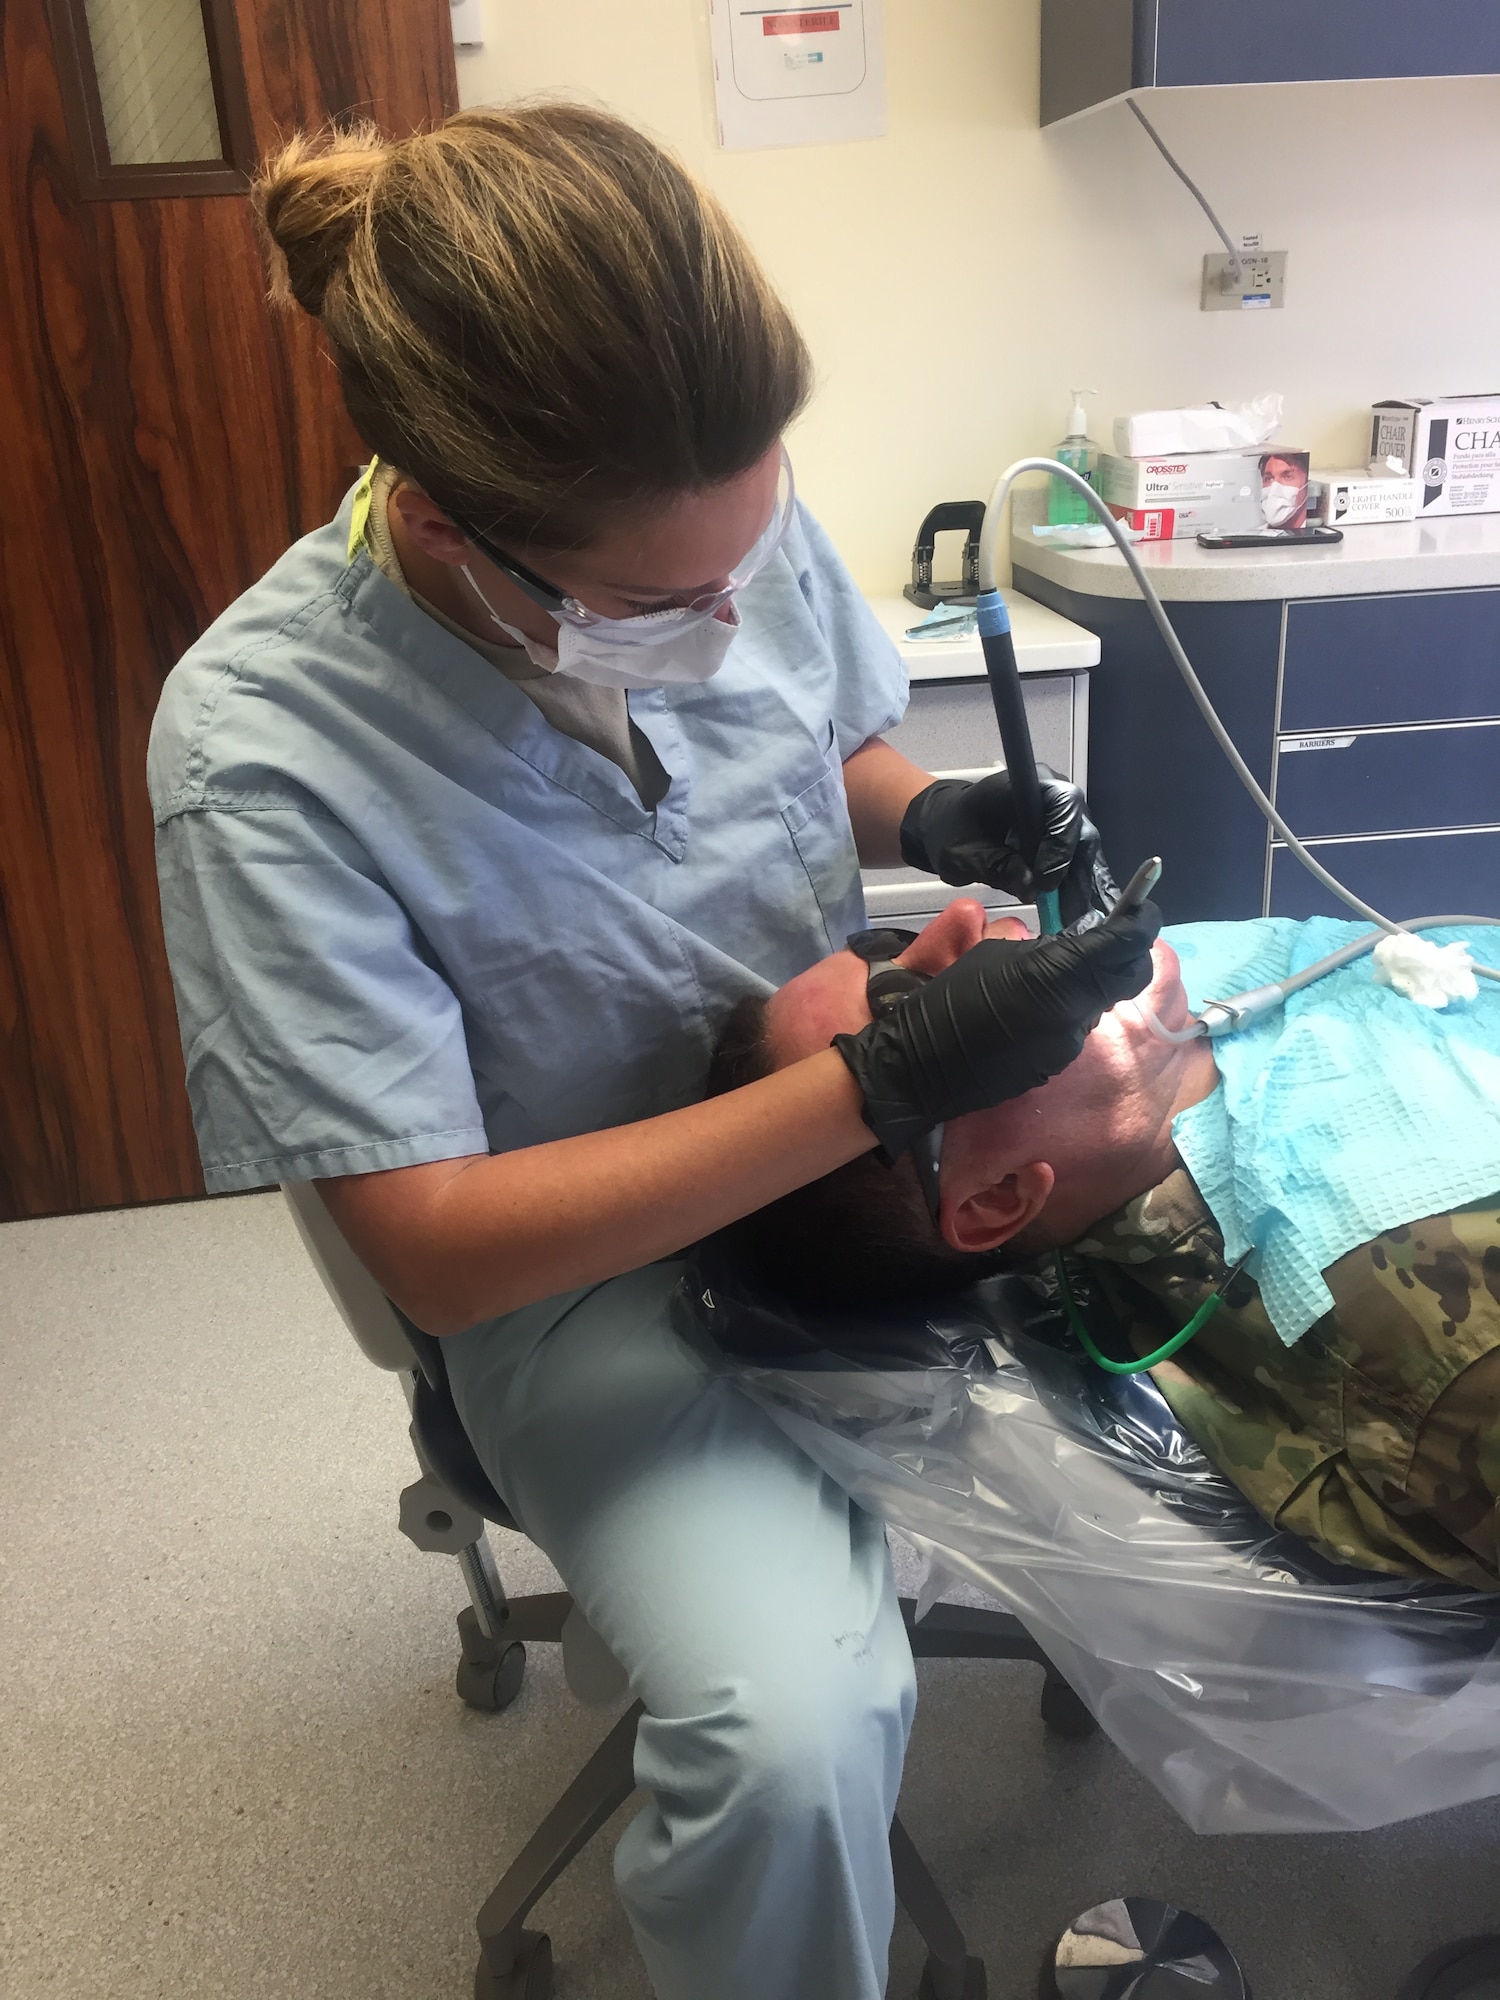 U.S. Air Force Technical Sgt. Nicole Cafarelli, dental hygienist in the New York Air National Guard's 106th Rescue Wing, is cleaning a patients teeth at Joint Base Pearl Harbor-Hickam in Hawaii Aug. 29, 2017. The medical technicians on the deployment for training received hands-on experience in providing patient care under the supervision of skilled preceptors.